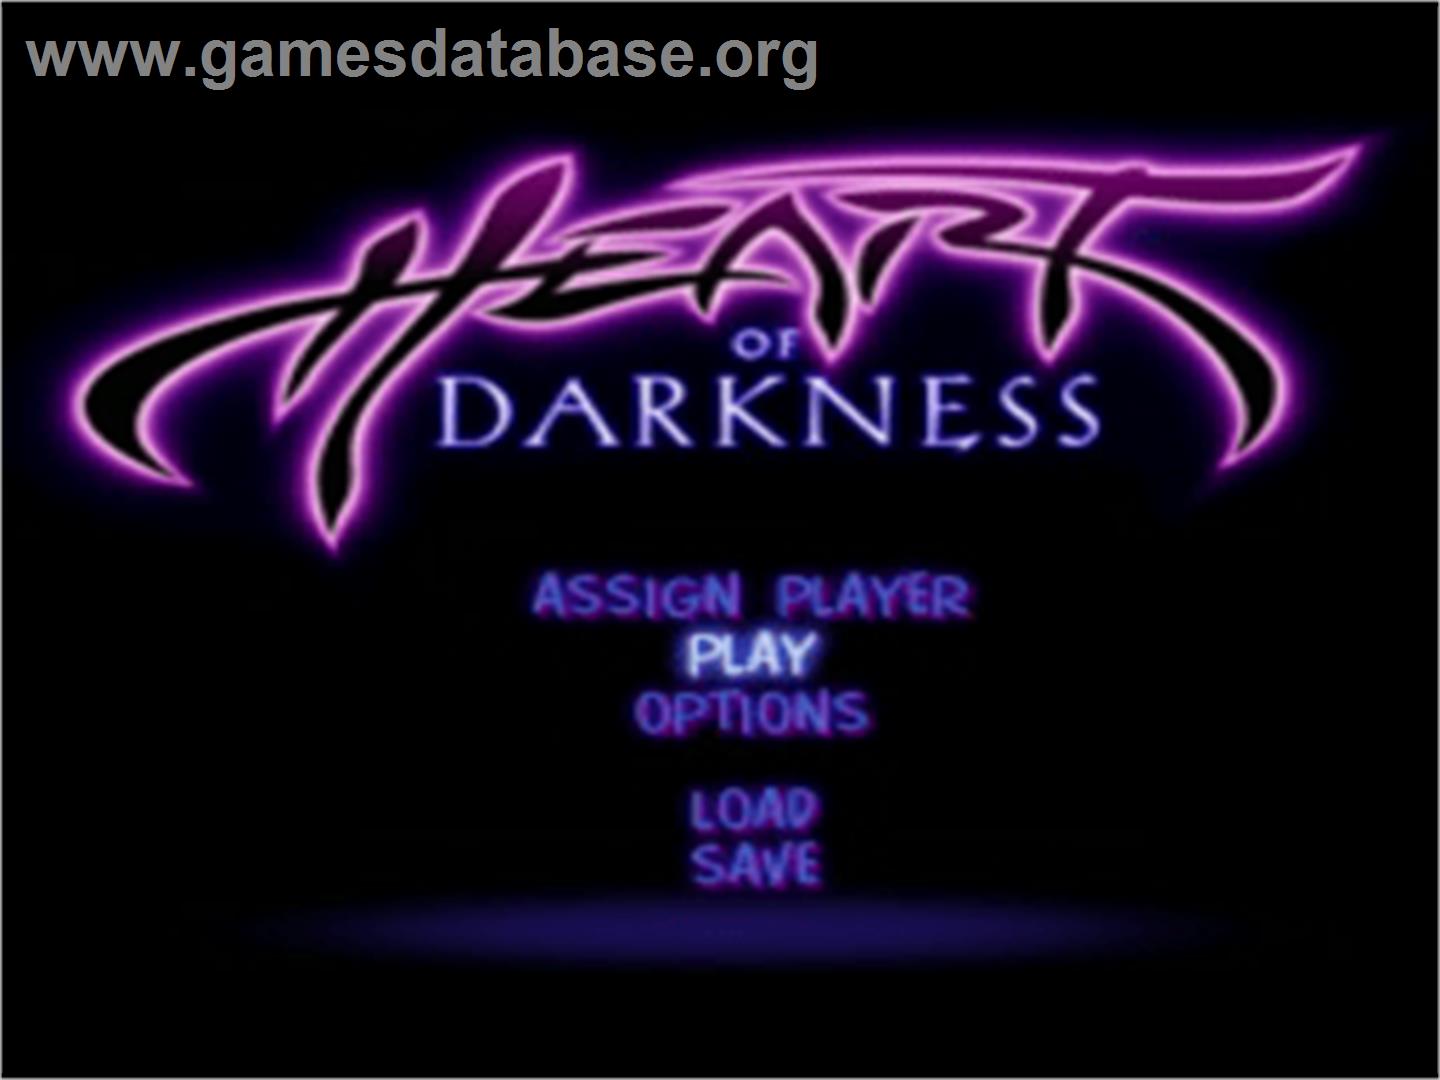 Heart of Darkness - Sony Playstation - Artwork - Title Screen